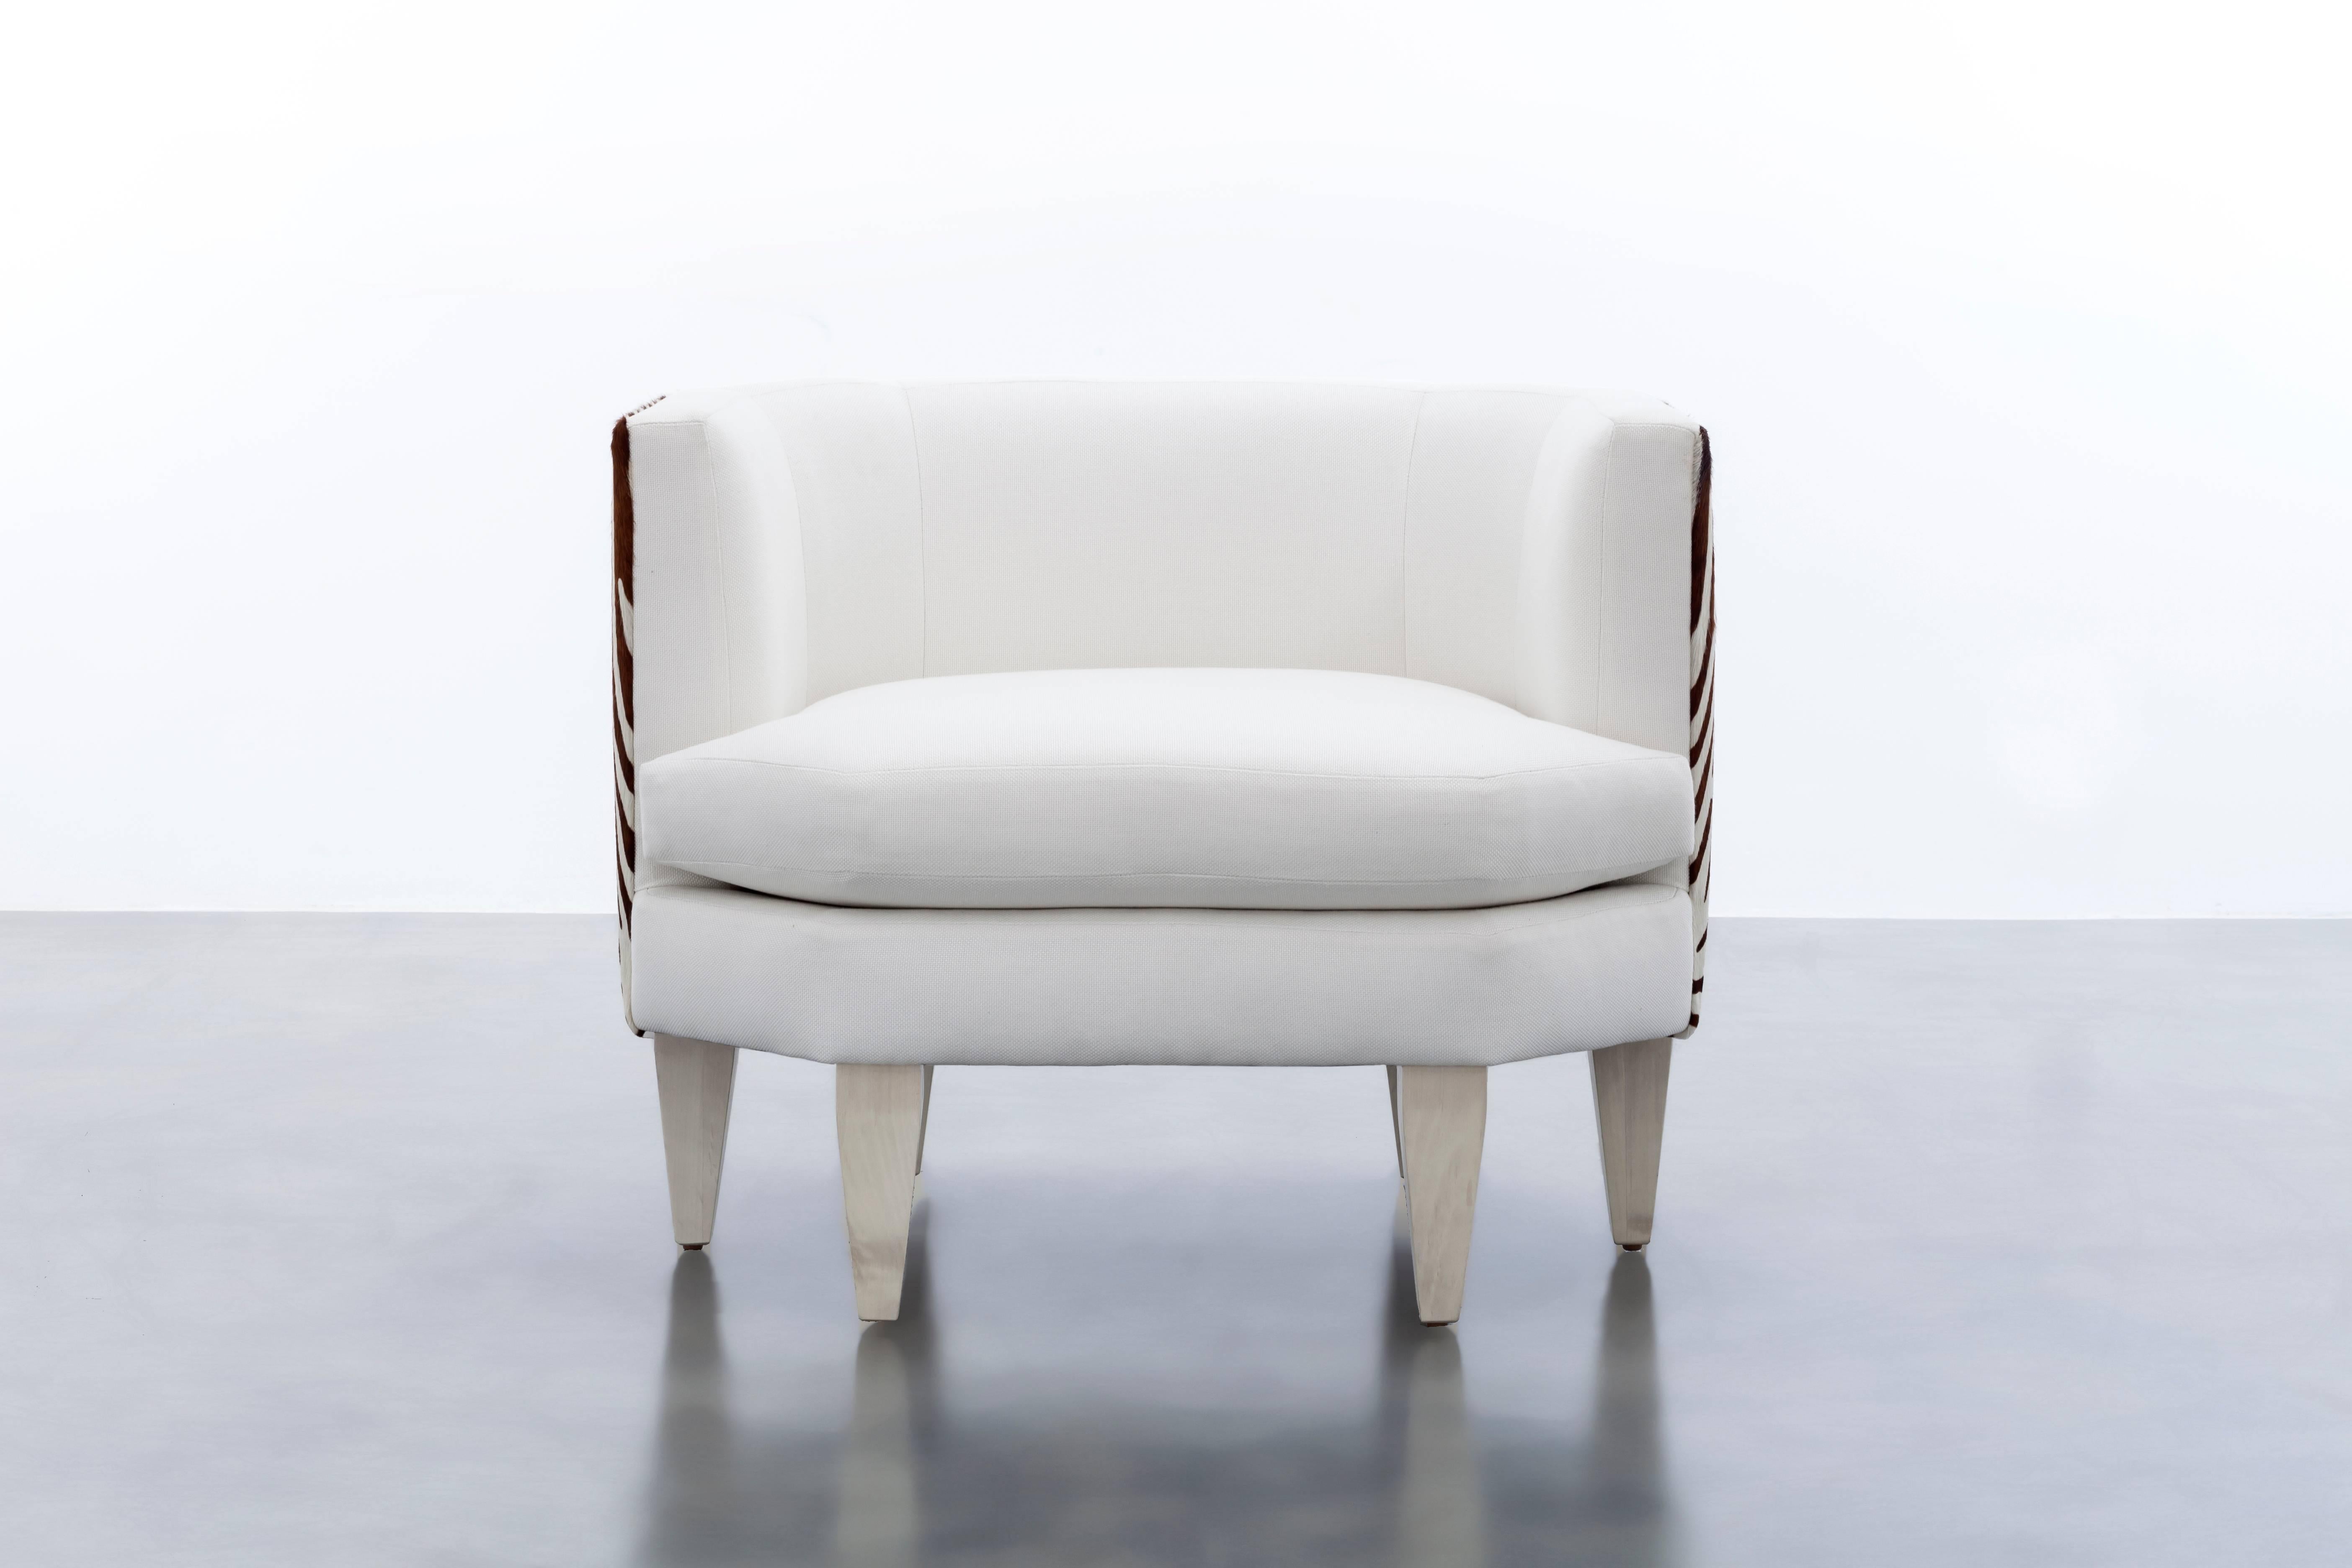 The Odette Chair features an octagonal shaped upholstered seat and back with contrast hair on hide back panels floating upon six wood legs.  Fully custom and made to order in California.  As shown in Bamboo White and Contrast Hair on Hide $6,475.00.